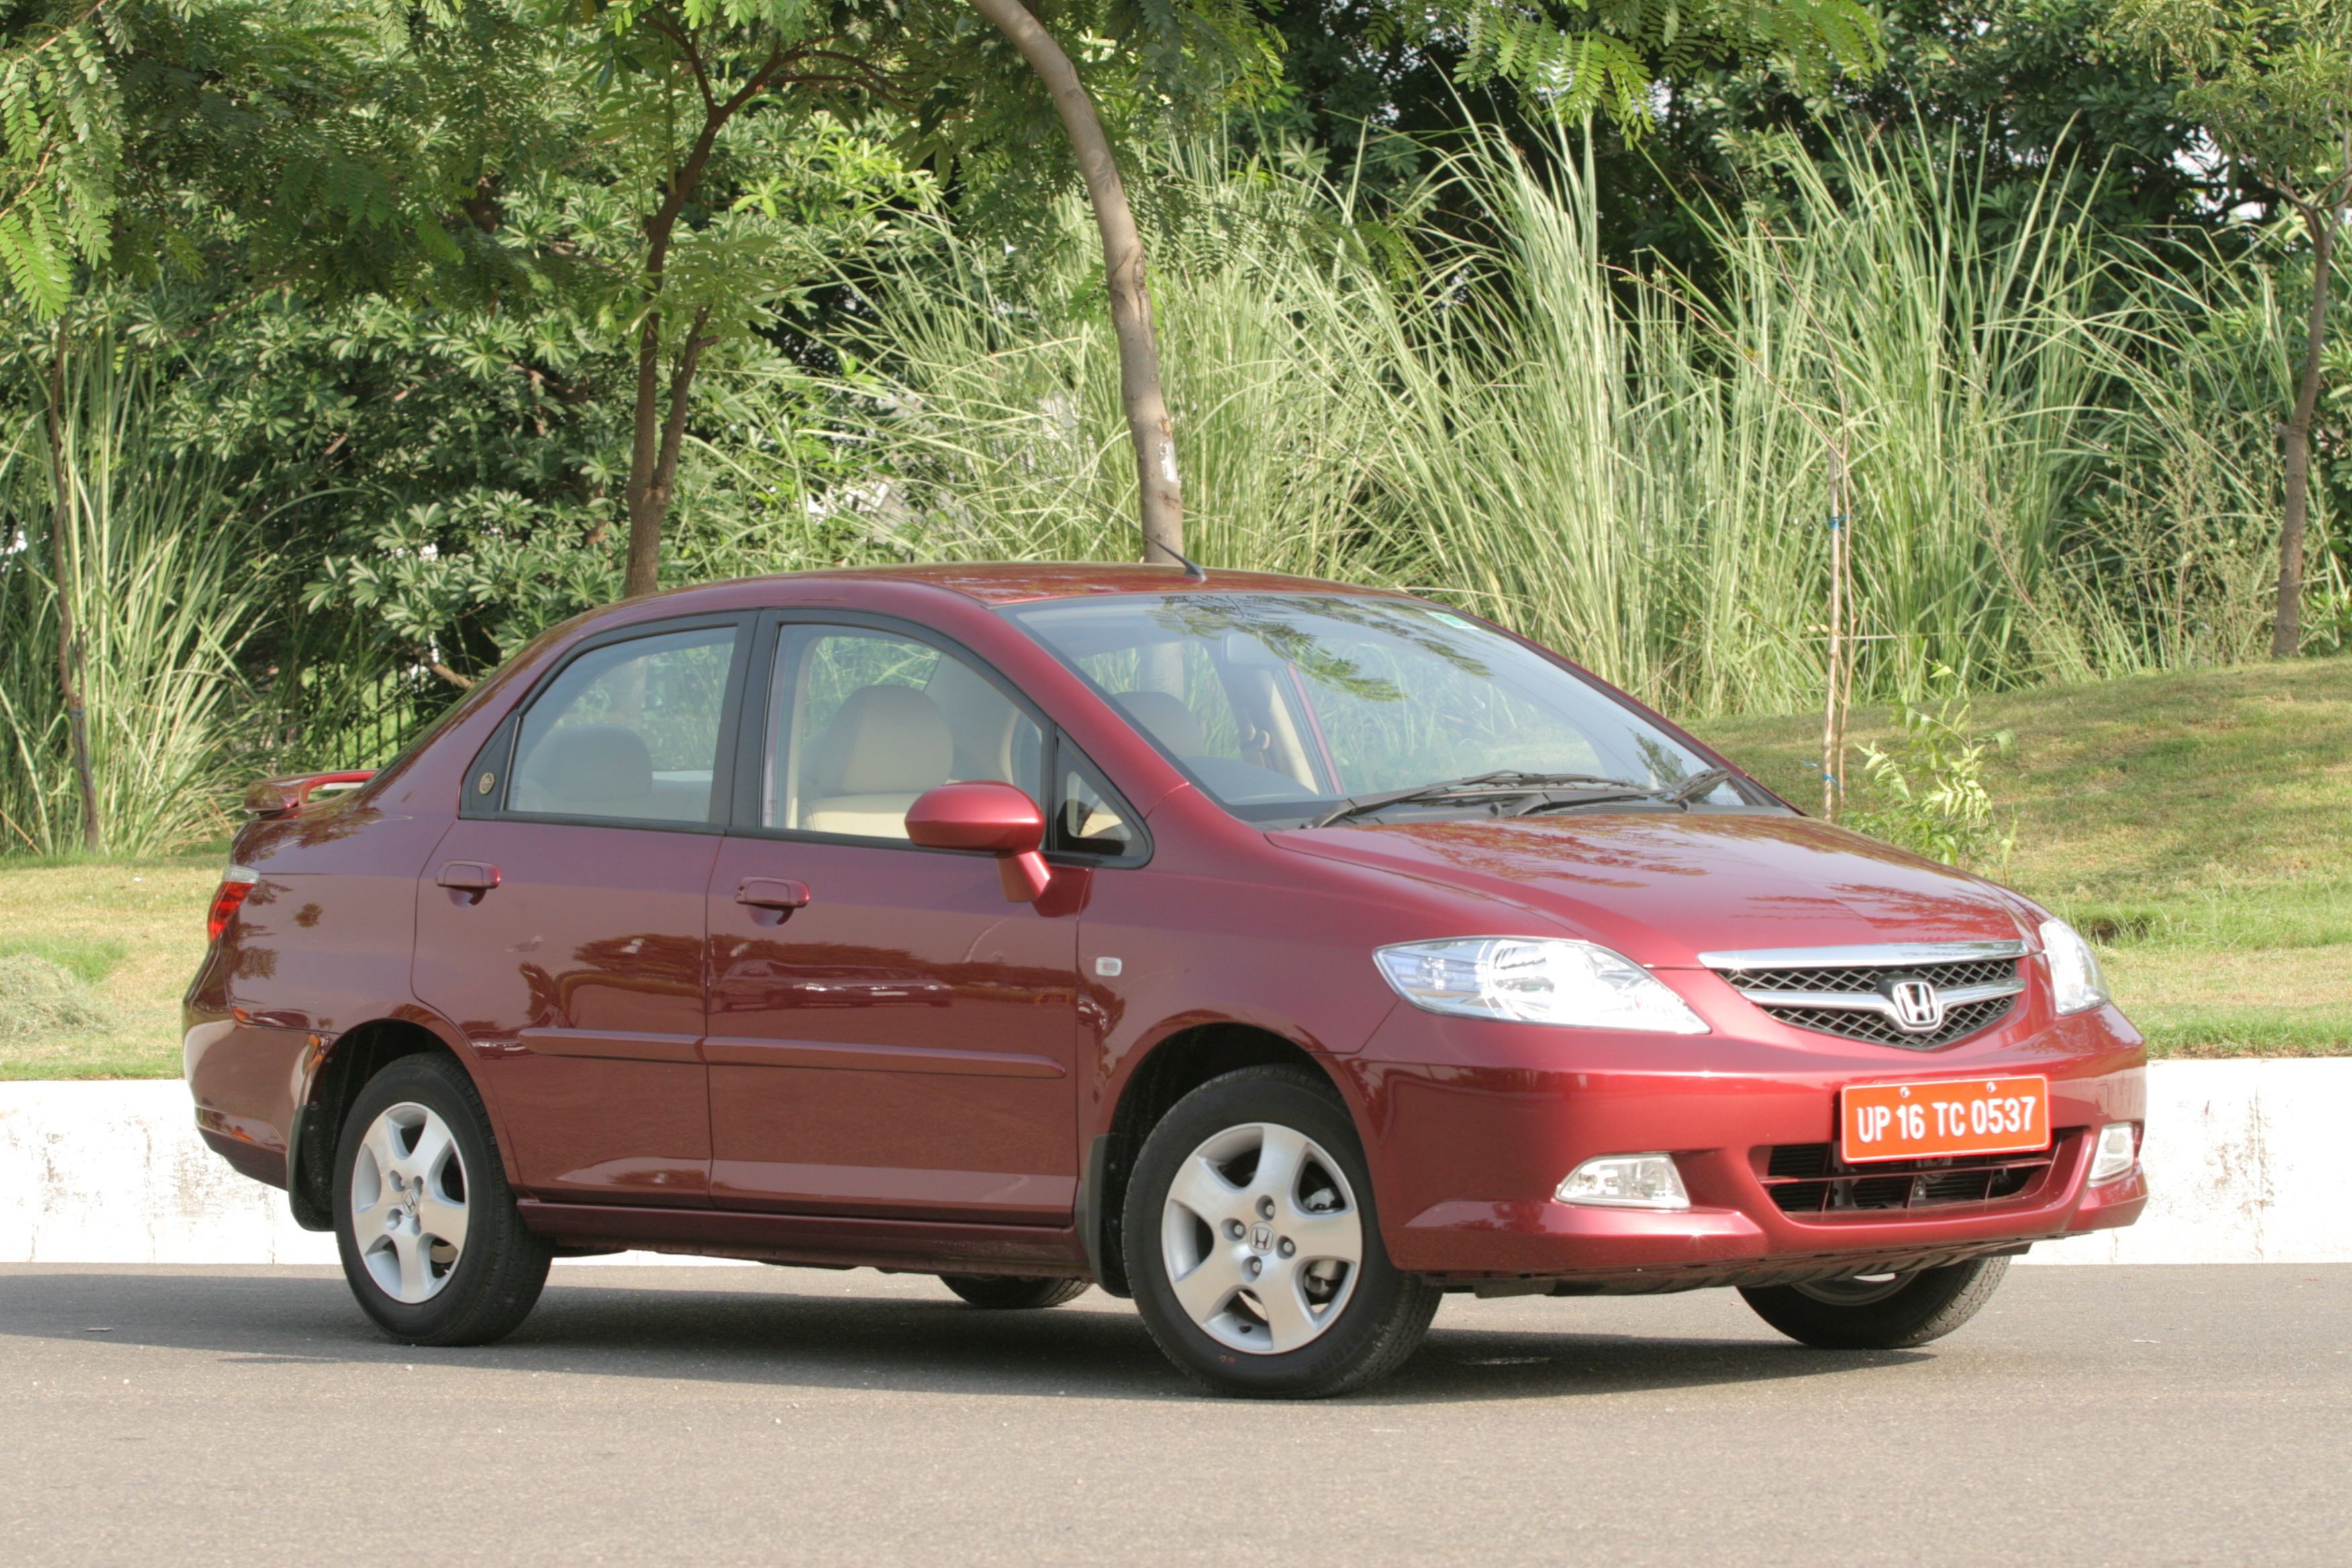 Honda City Zx Exi Price Incl Gst In India Ratings